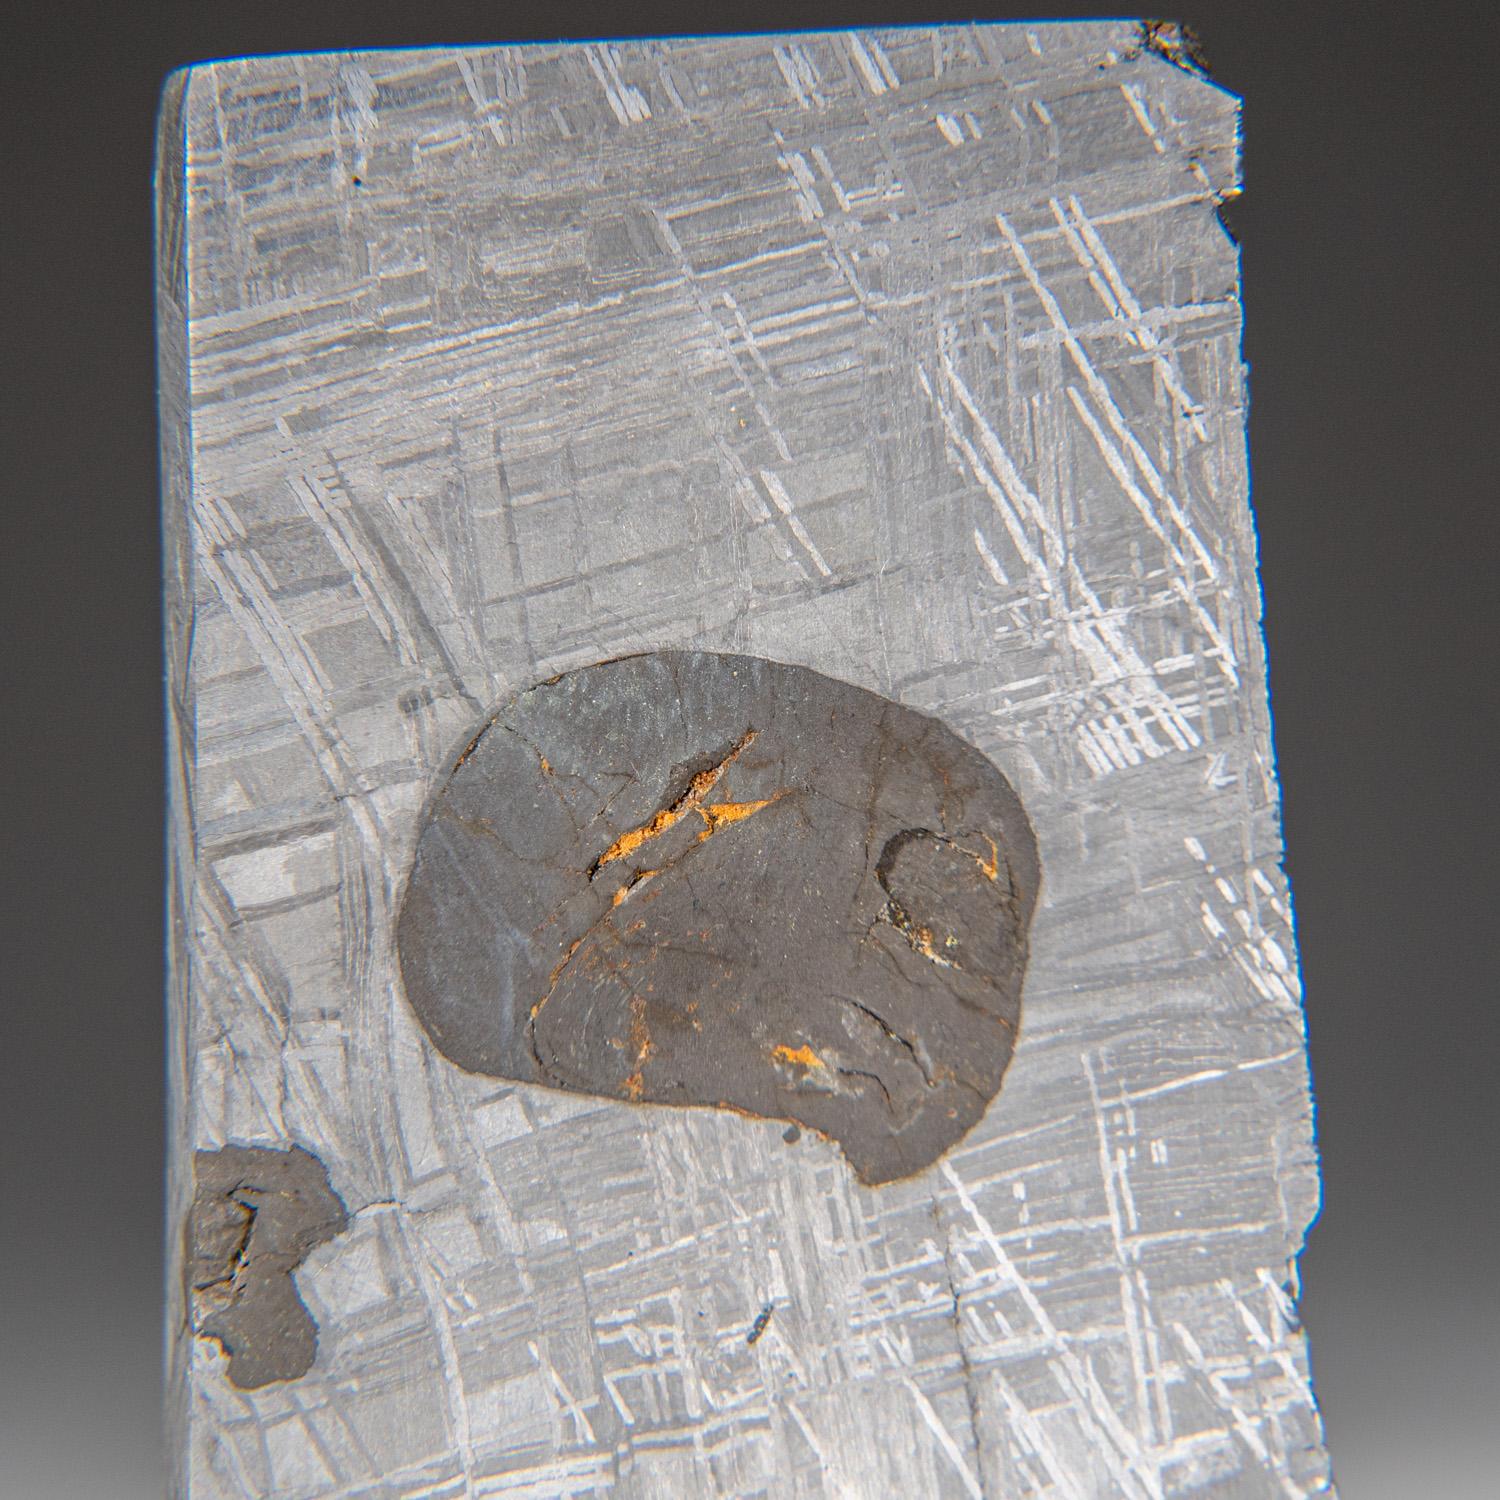 Genuine Muonionalusta Meteorite Slice from Norrbotten, Sweden.

The Muonionalusta is a meteorite classified as fine octahedrite, type IVA (Of) which impacted in northern Scandinavia, west of the border between Sweden and Finland, about one million